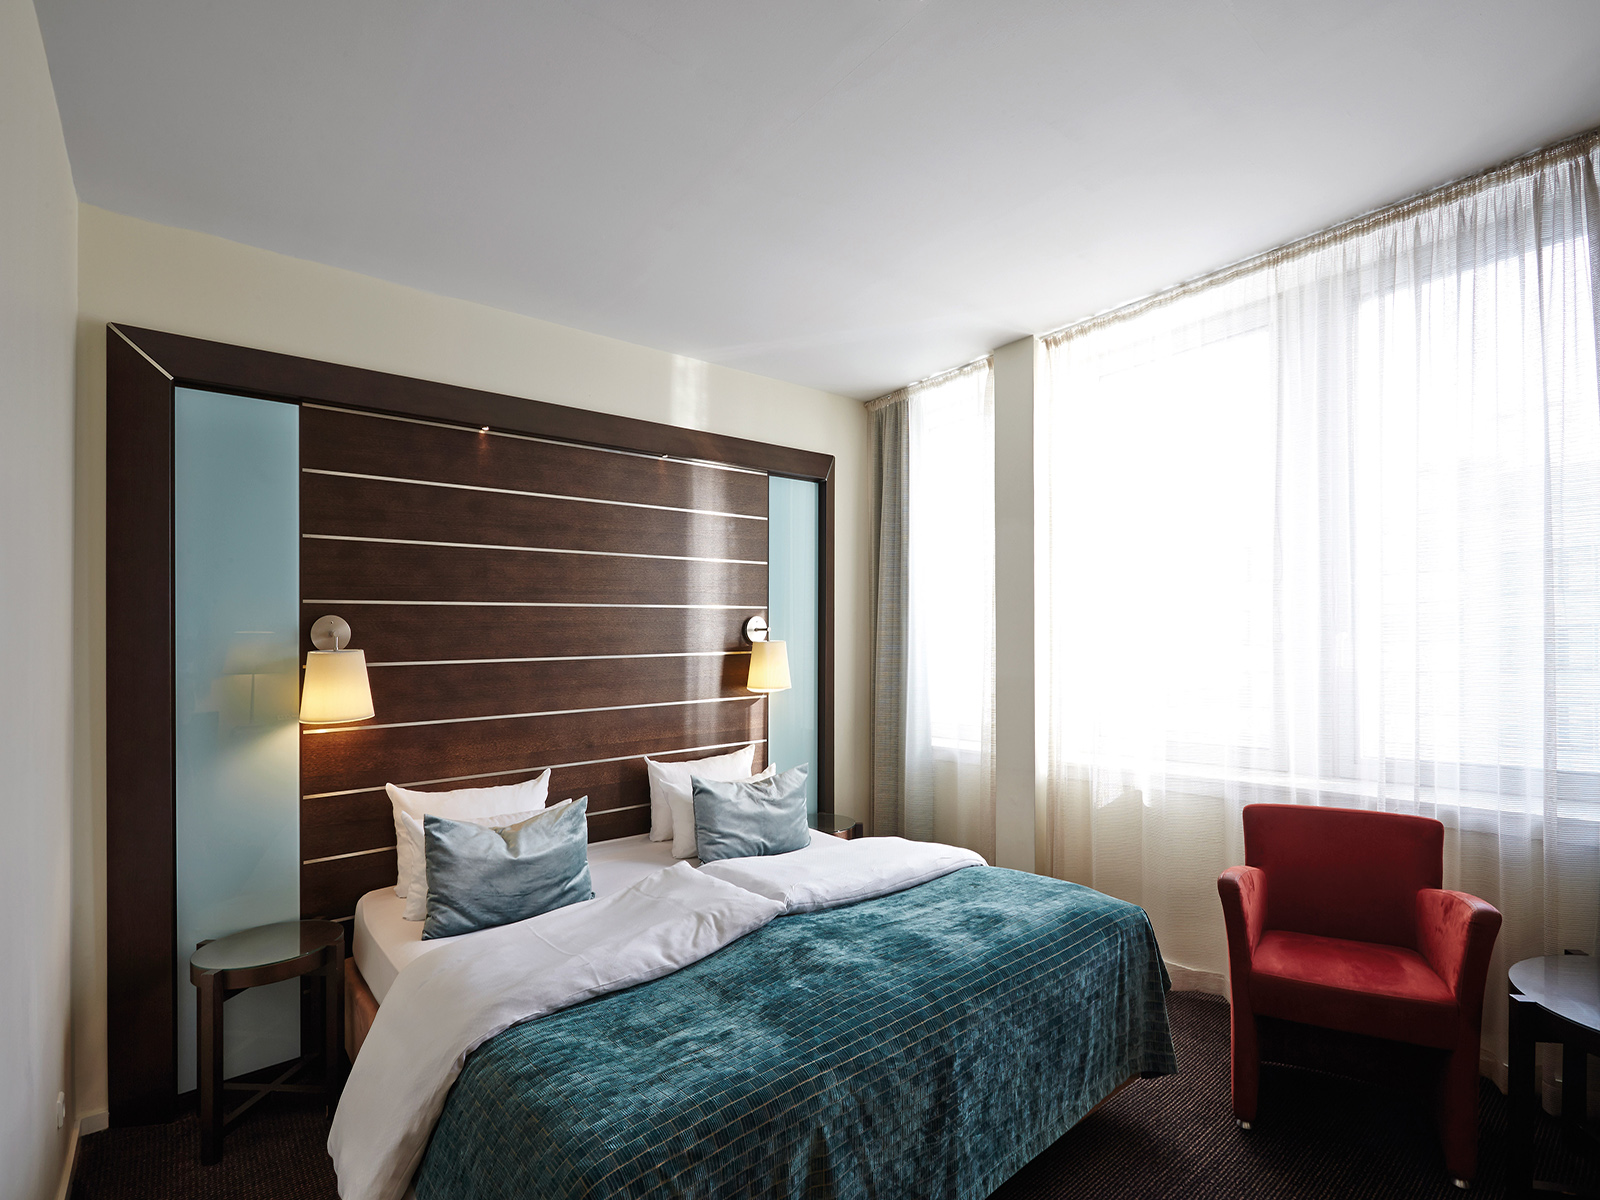 Imperial Hotel <br/>117.79 ew <br/> <a href='http://vakantieoplossing.nl/outpage/?id=3723622909481200fb9305f53d7806c1' target='_blank'>View Details</a>